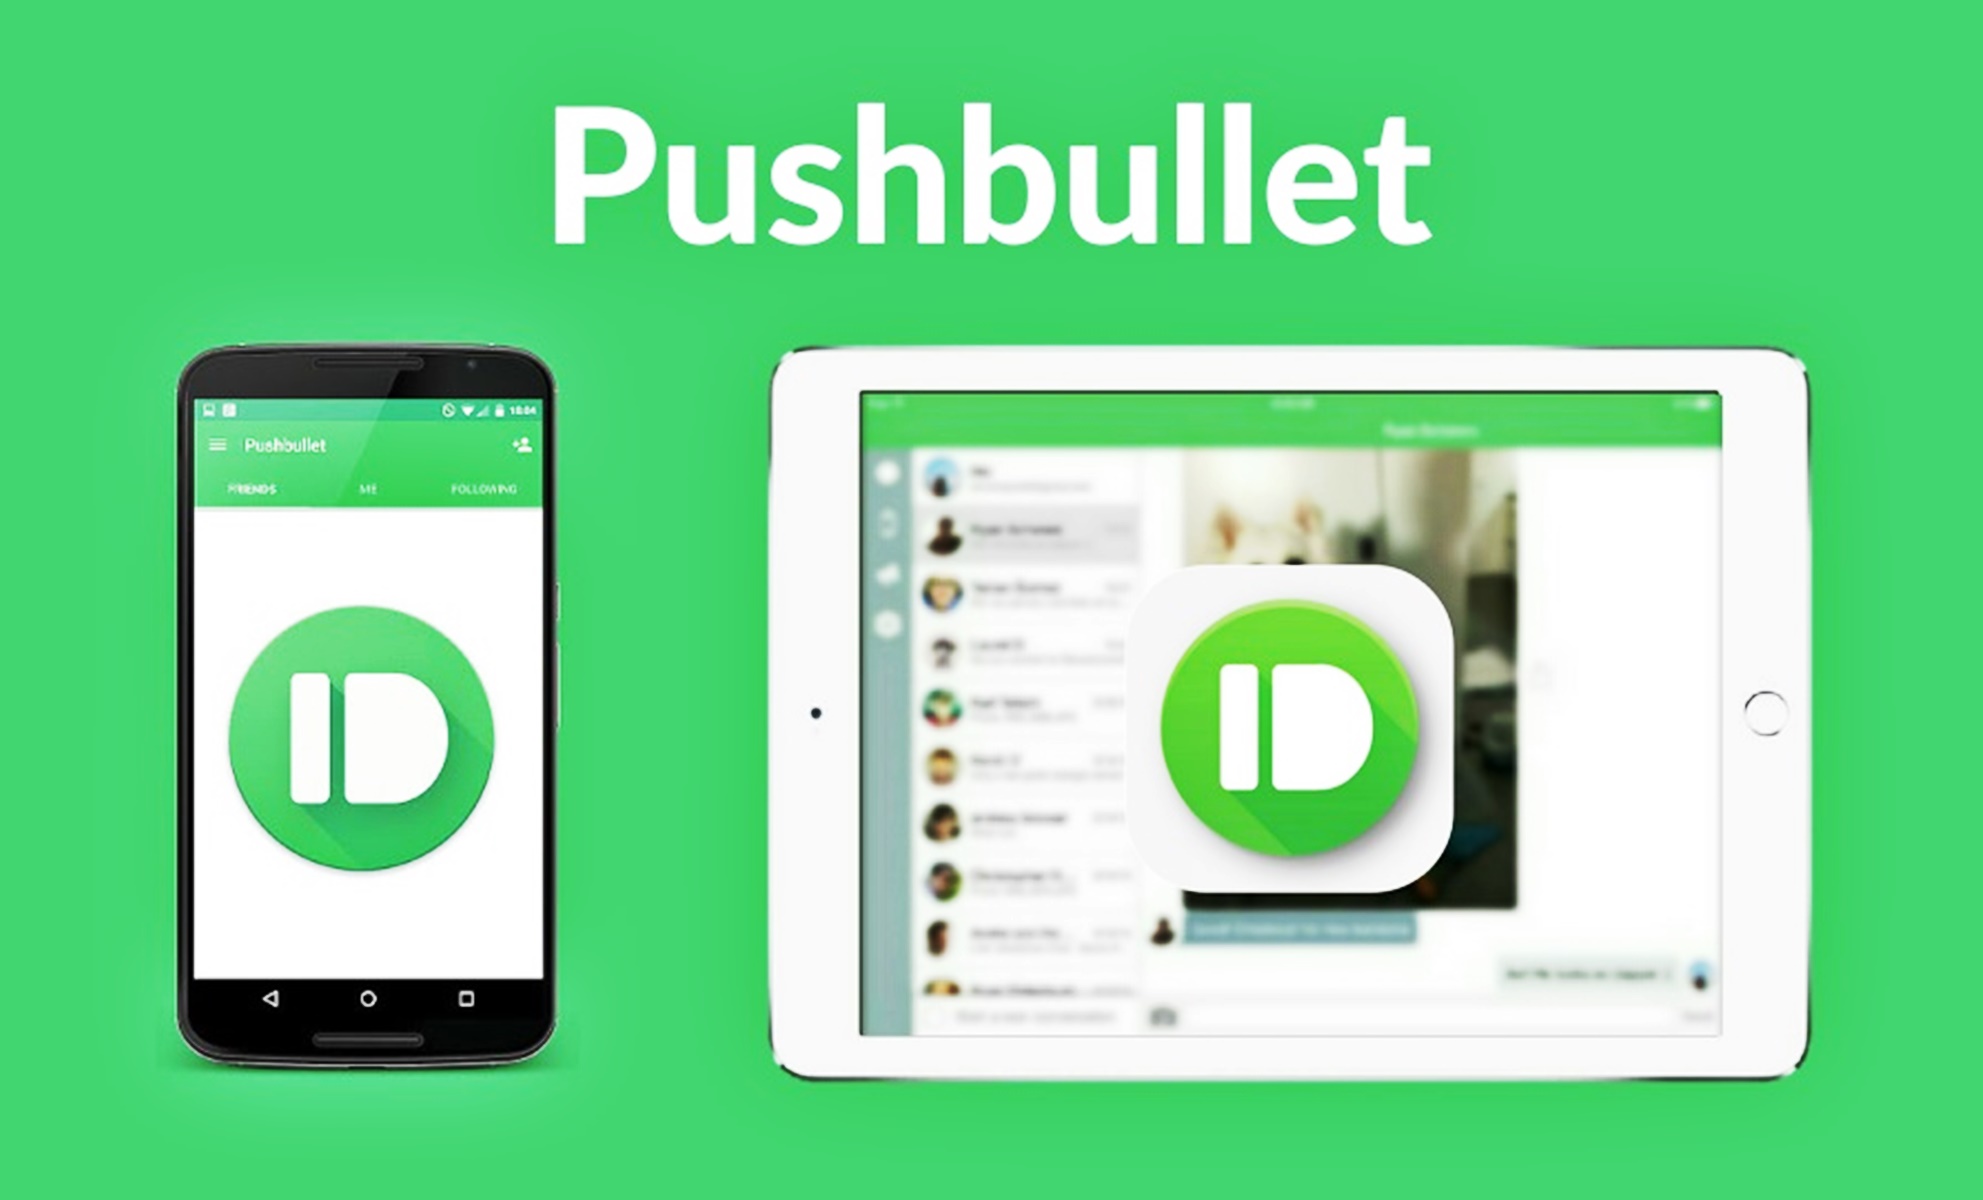 What Is The Pushbullet App For Android?